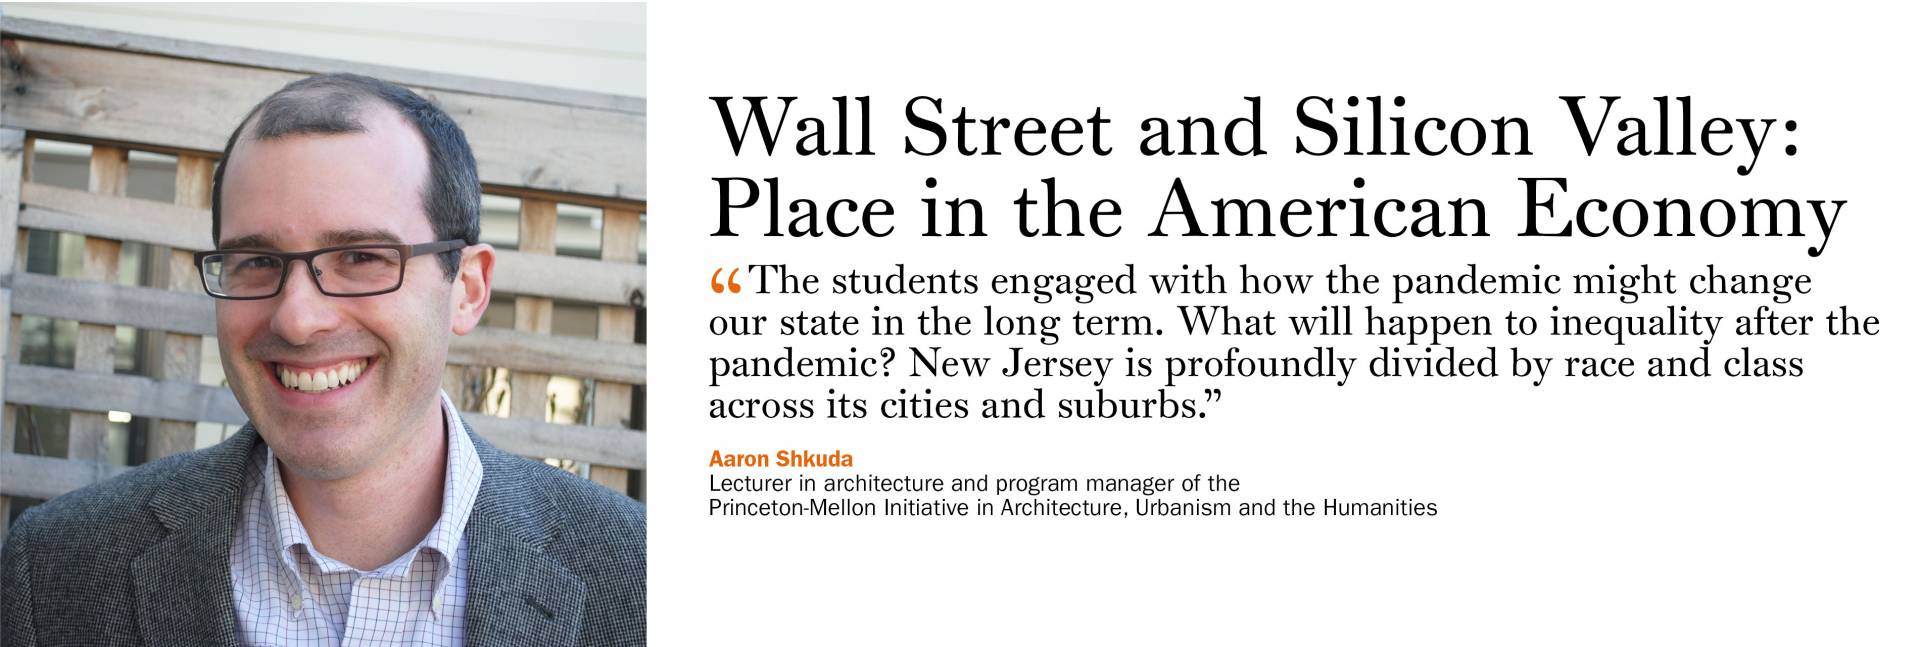 Wall Street and Silicon Valley: Place in the American Economy. Aaron Shkuda, lecturer in architecture and program manager of the Princeton-Mellon Initiative in Architecture, Urbanism and the Humanities. “The students engaged with how the pandemic might change our state in the long term. What will happen to inequality after the pandemic? New Jersey is profoundly divided by race and class across its cities and suburbs.”